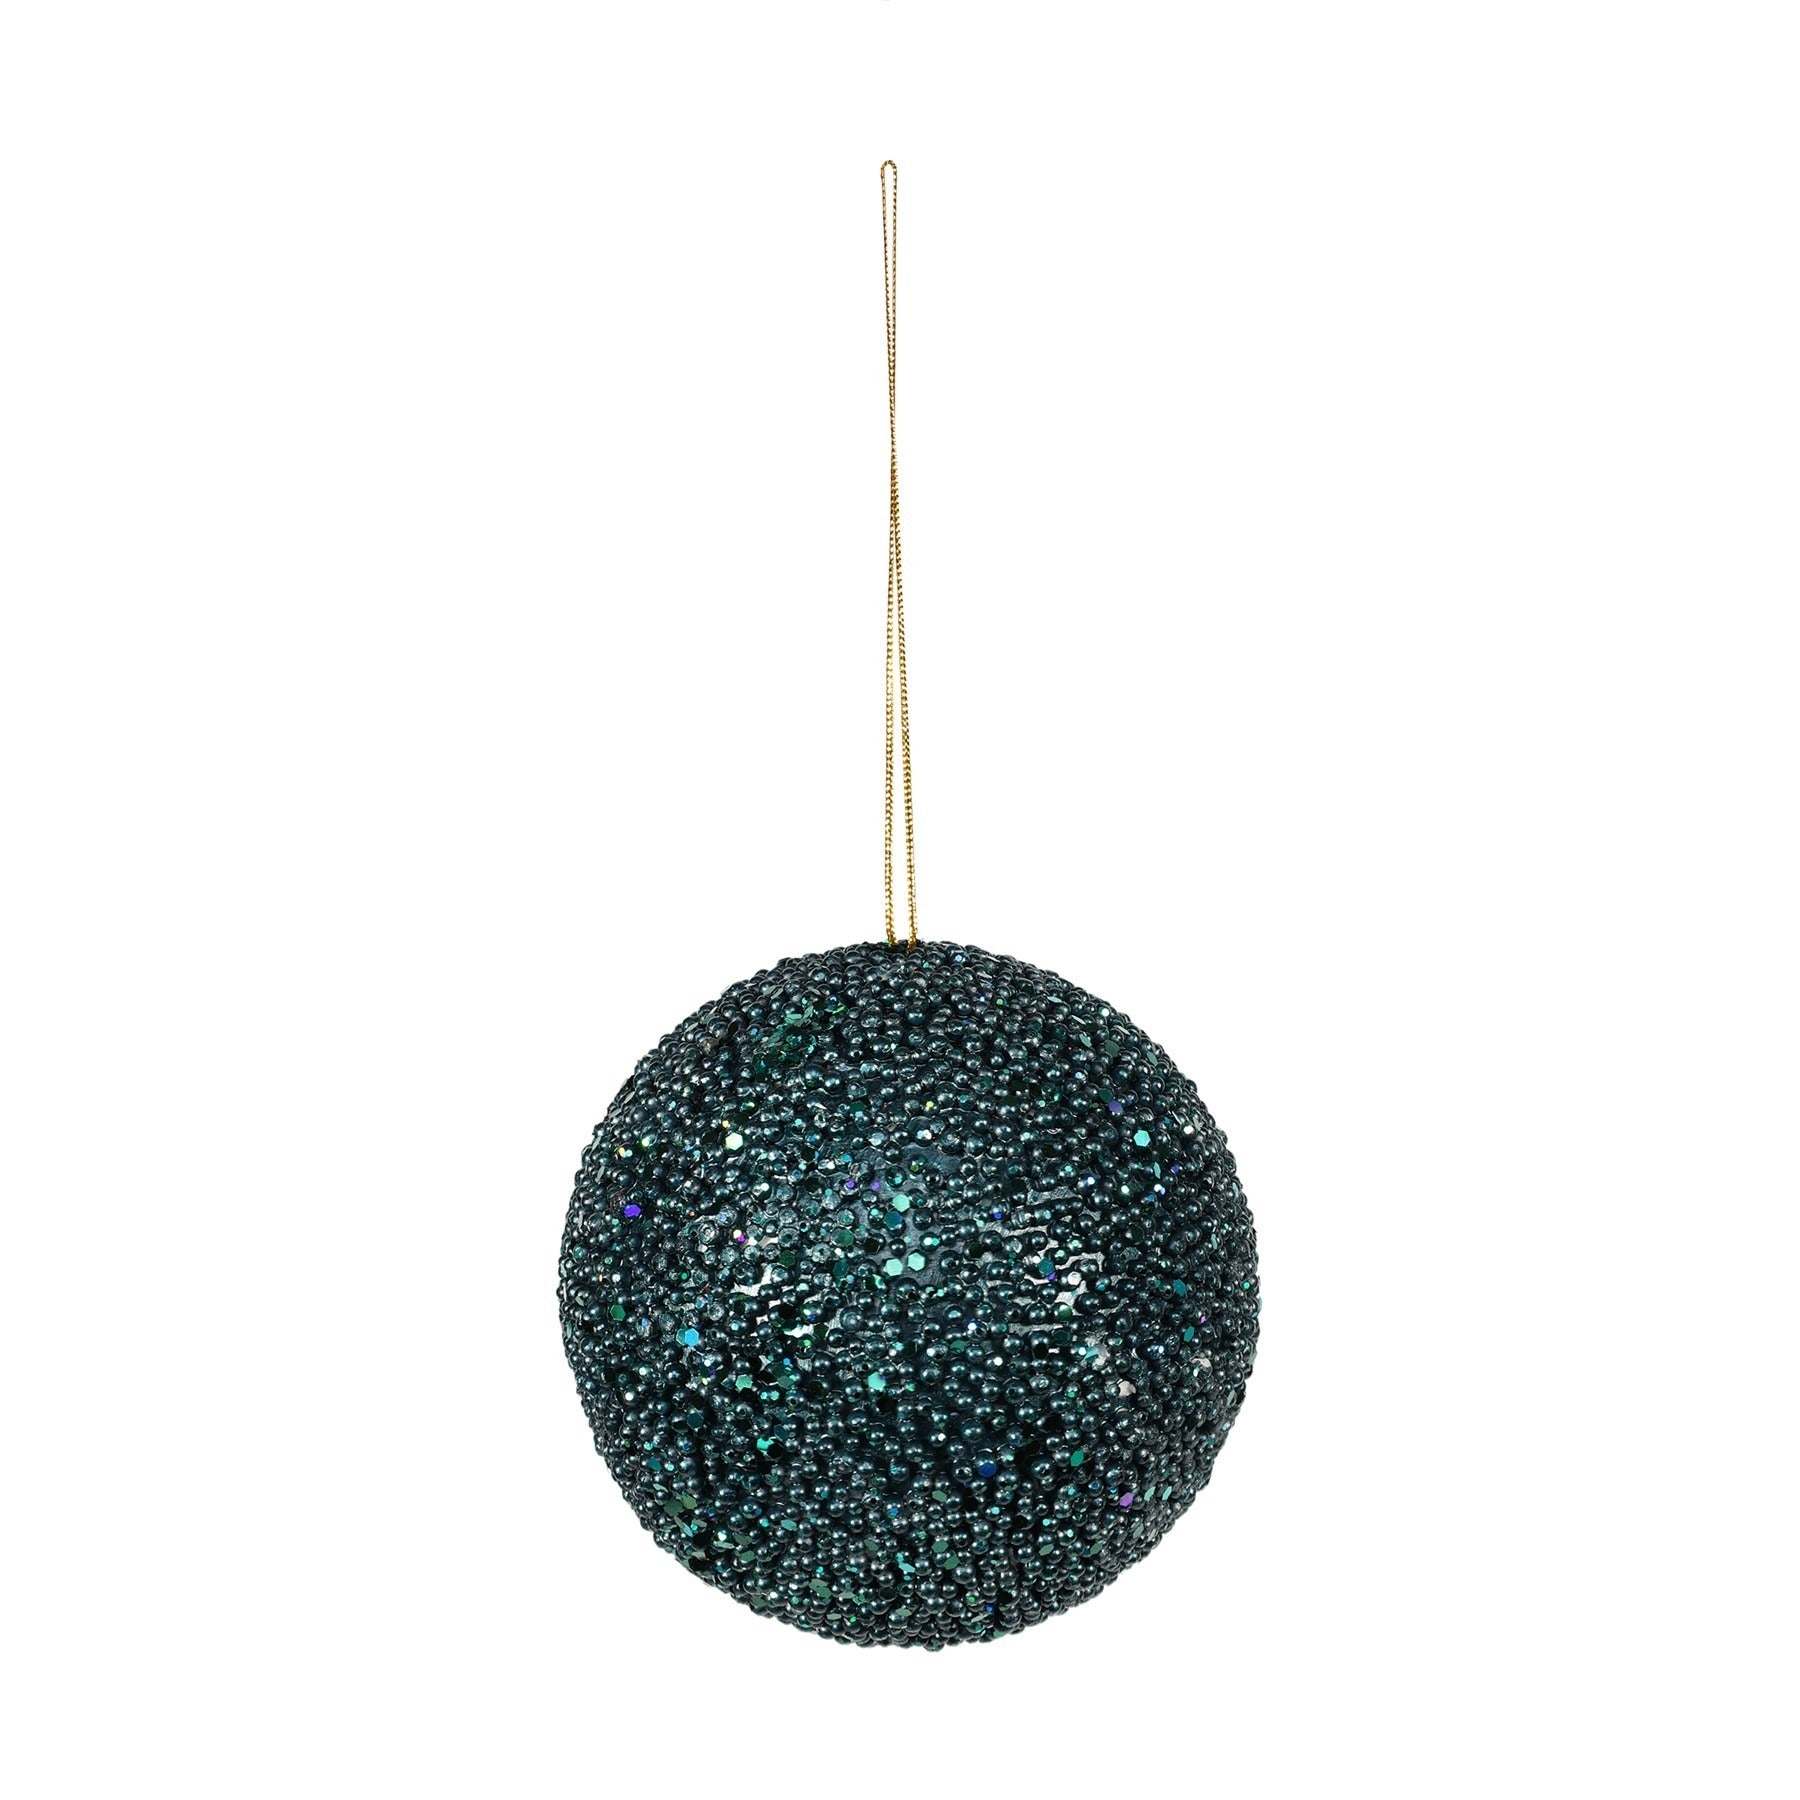 View Peacock Glitter Bauble Dia12cm information